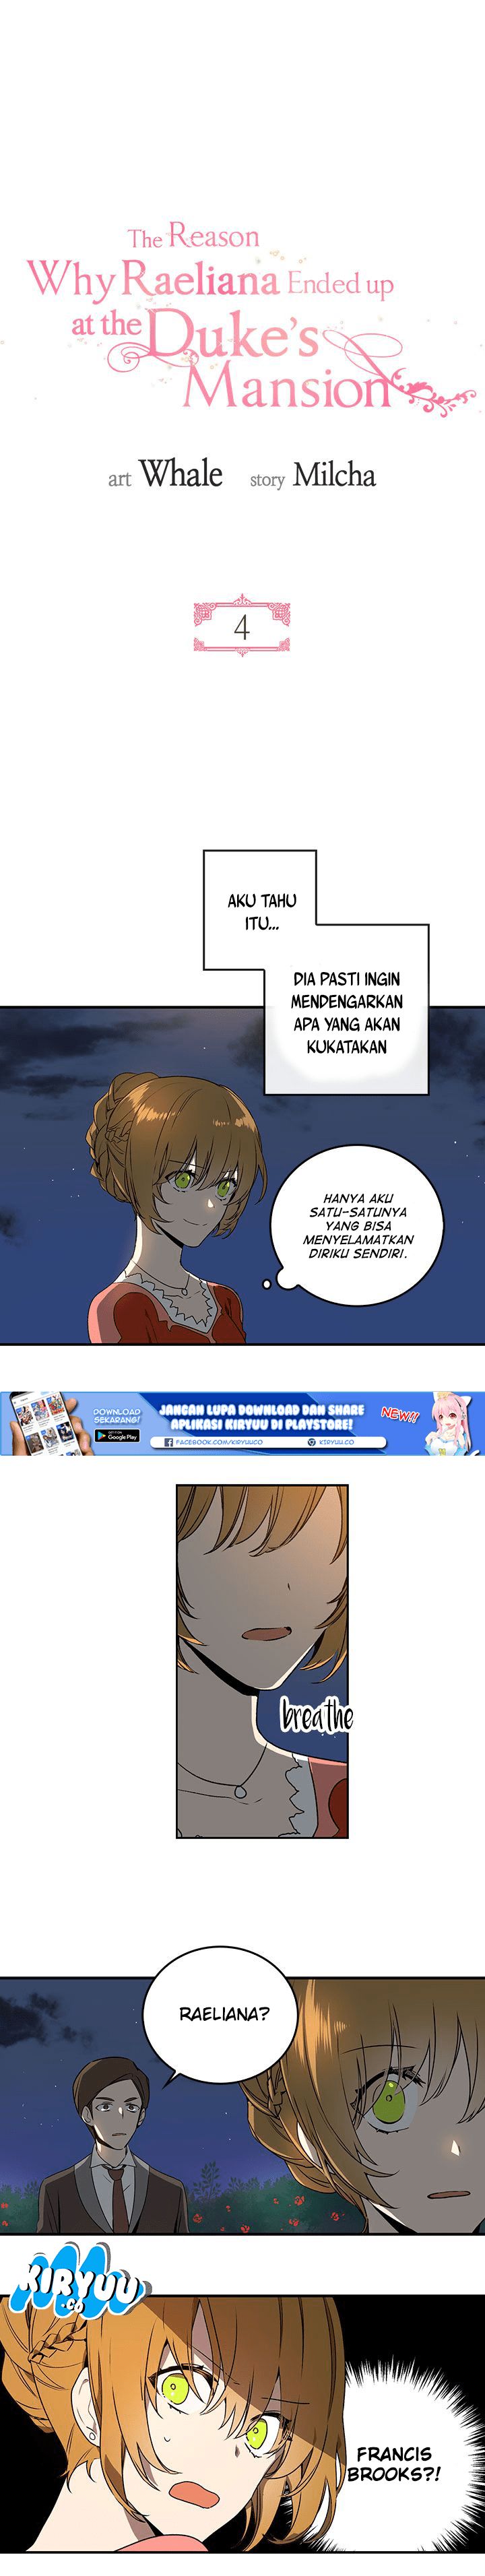 The Reason Why Raeliana Ended up at the Duke’s Mansion Chapter 4